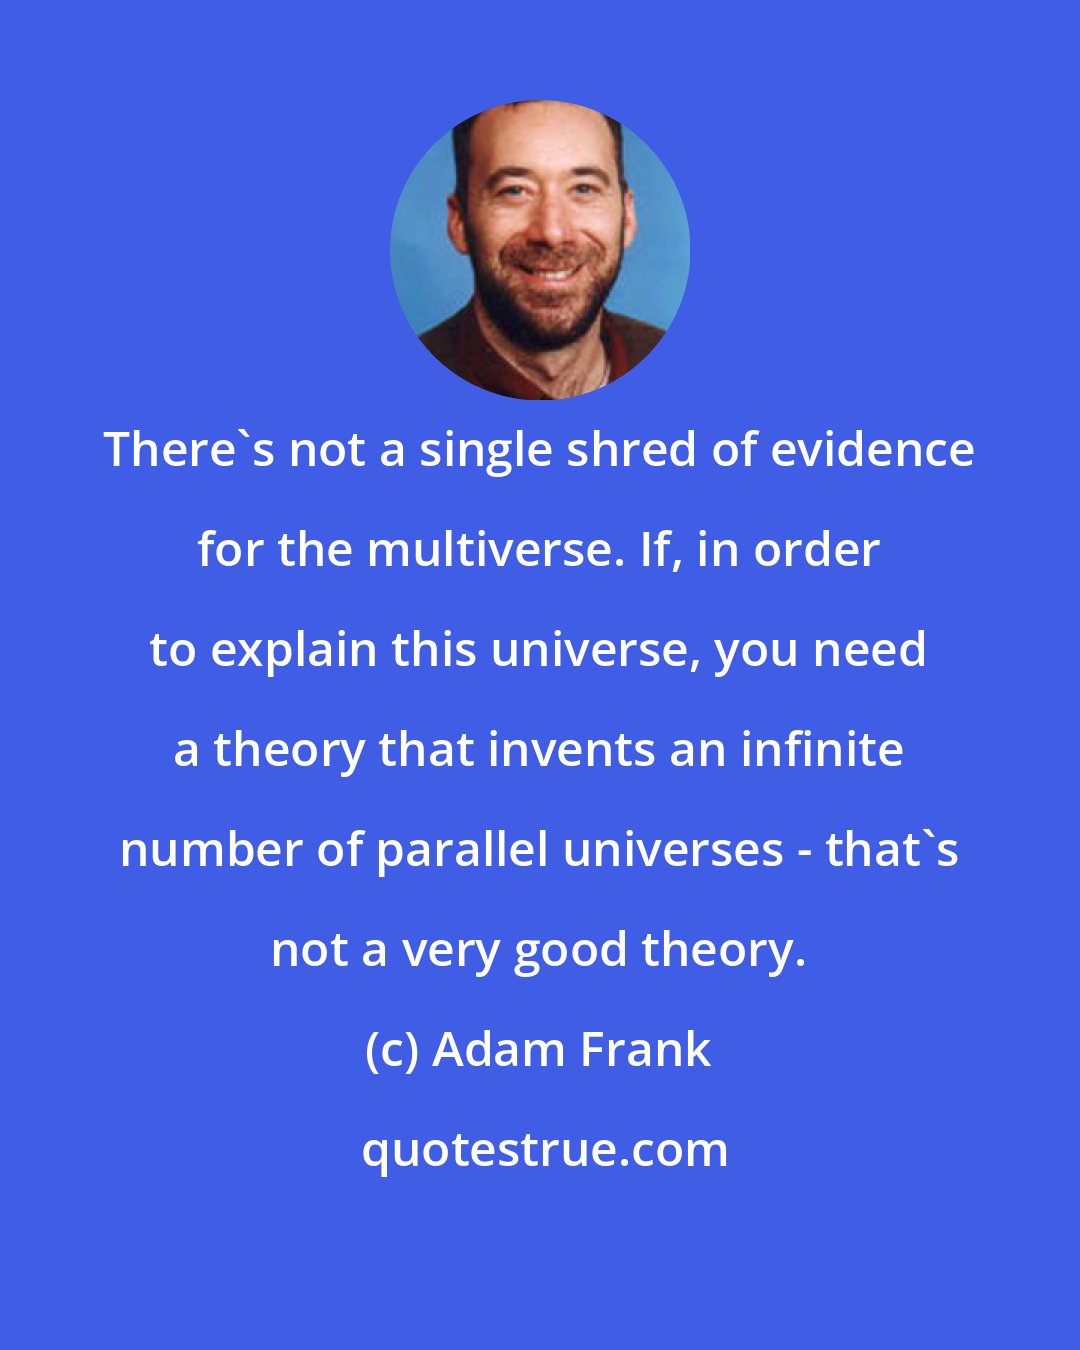 Adam Frank: There's not a single shred of evidence for the multiverse. If, in order to explain this universe, you need a theory that invents an infinite number of parallel universes - that's not a very good theory.